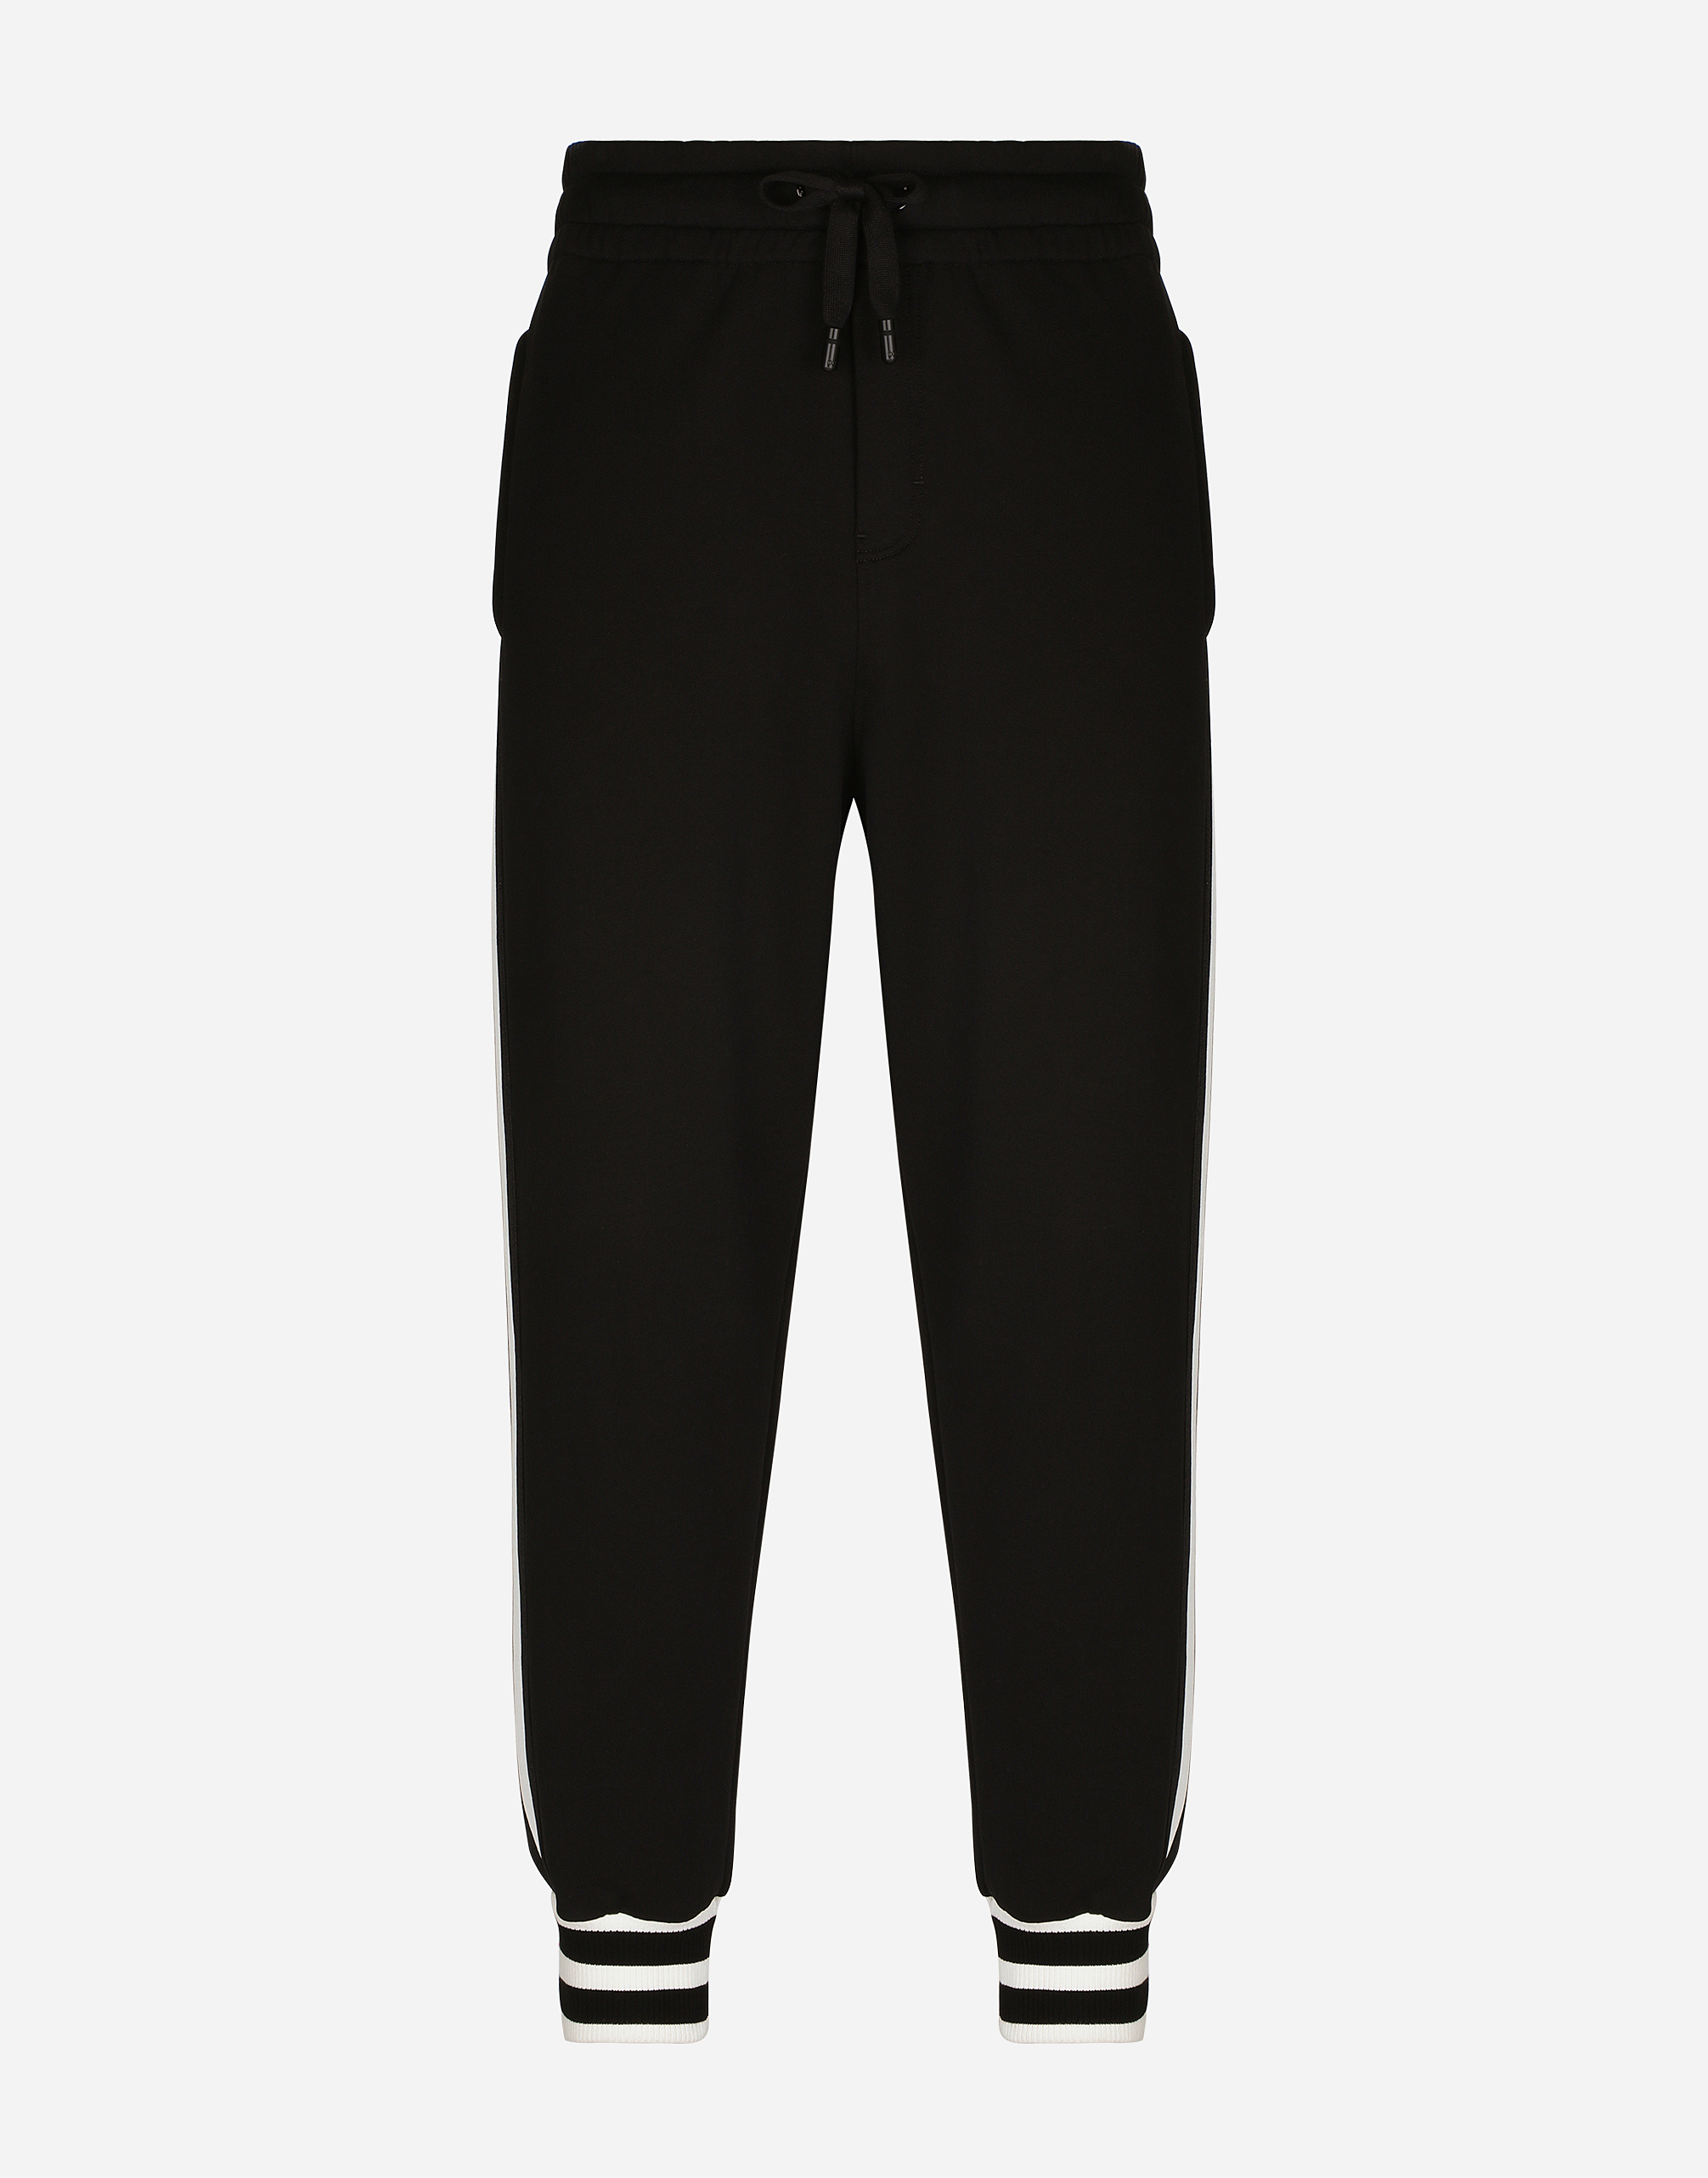 Jersey jogging pants with bands and DG logo in Black